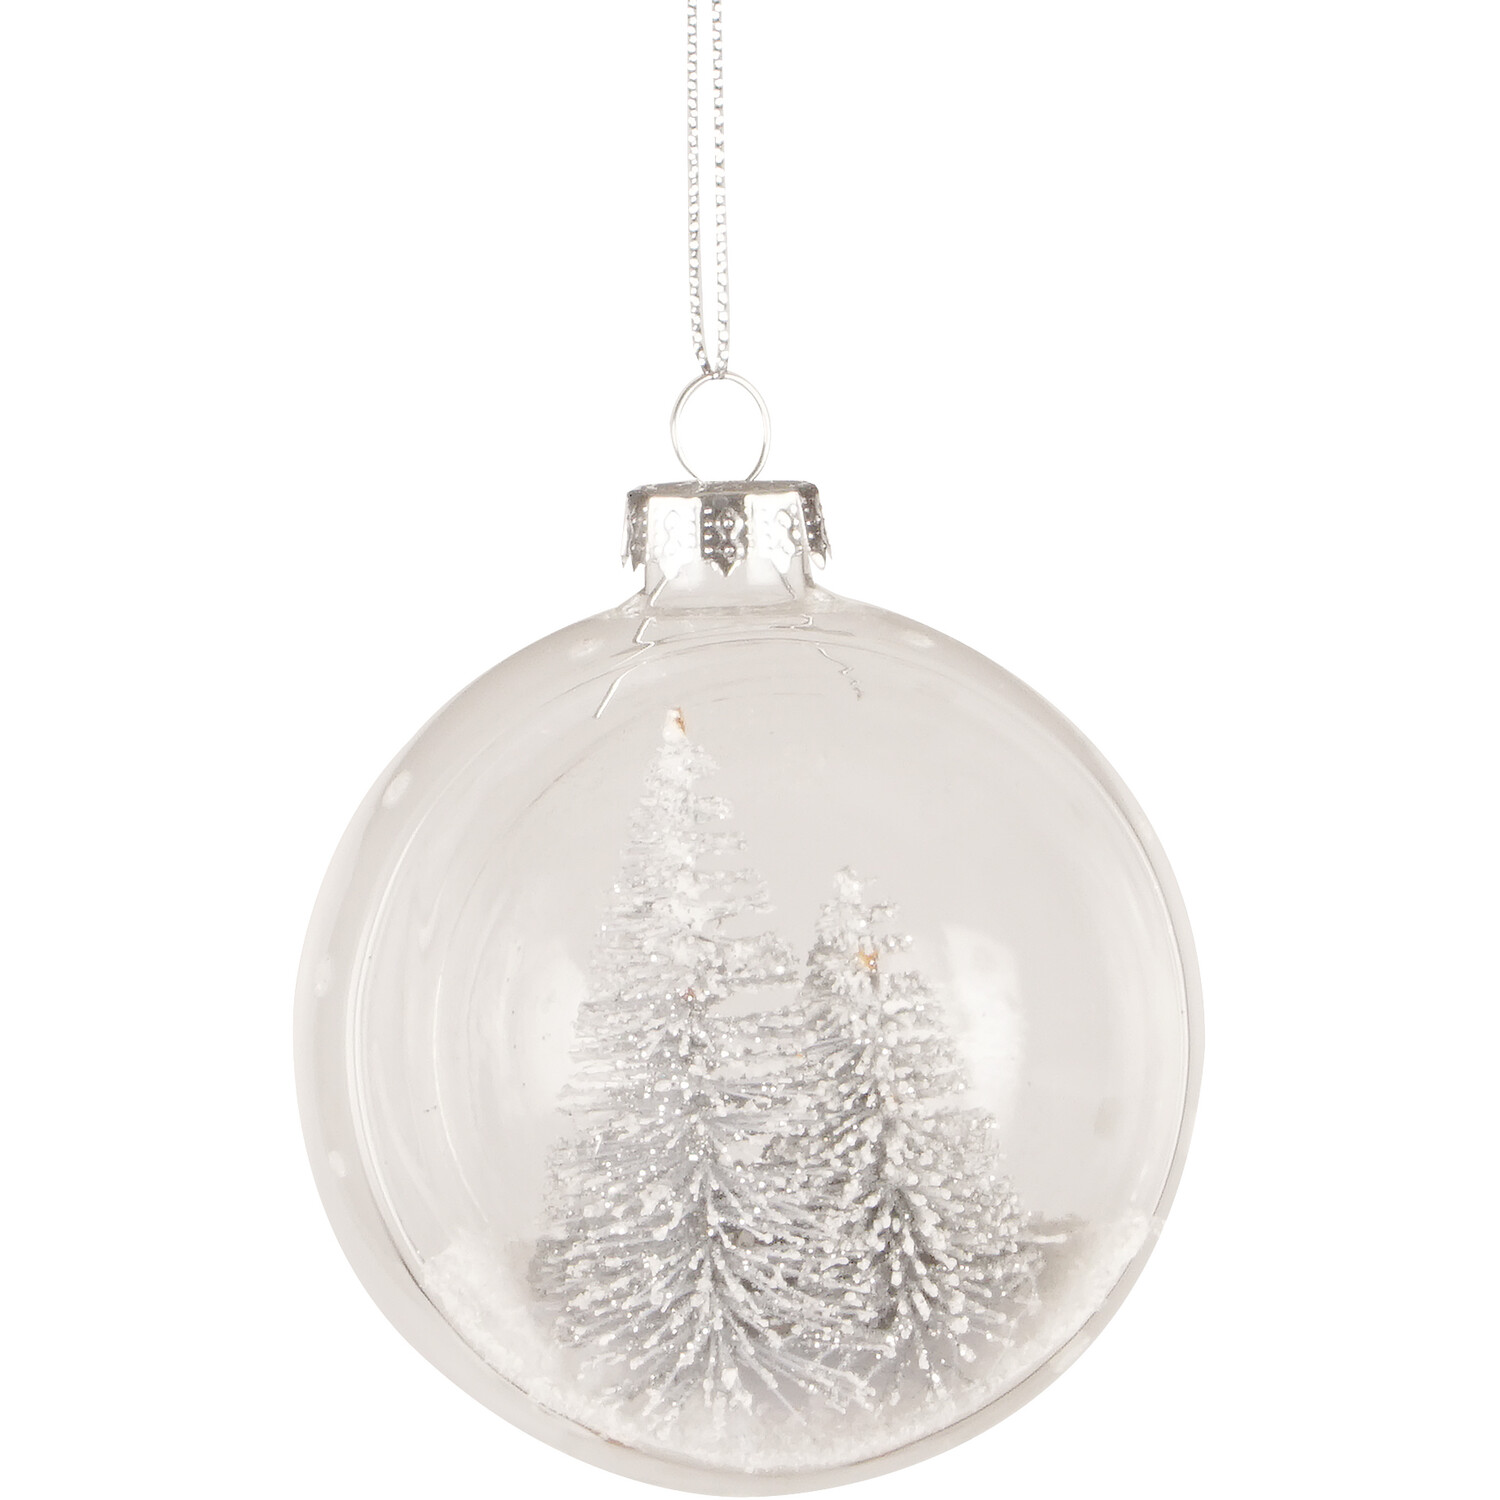 Alpine Lodge Open Front Tree Christmas Bauble Image